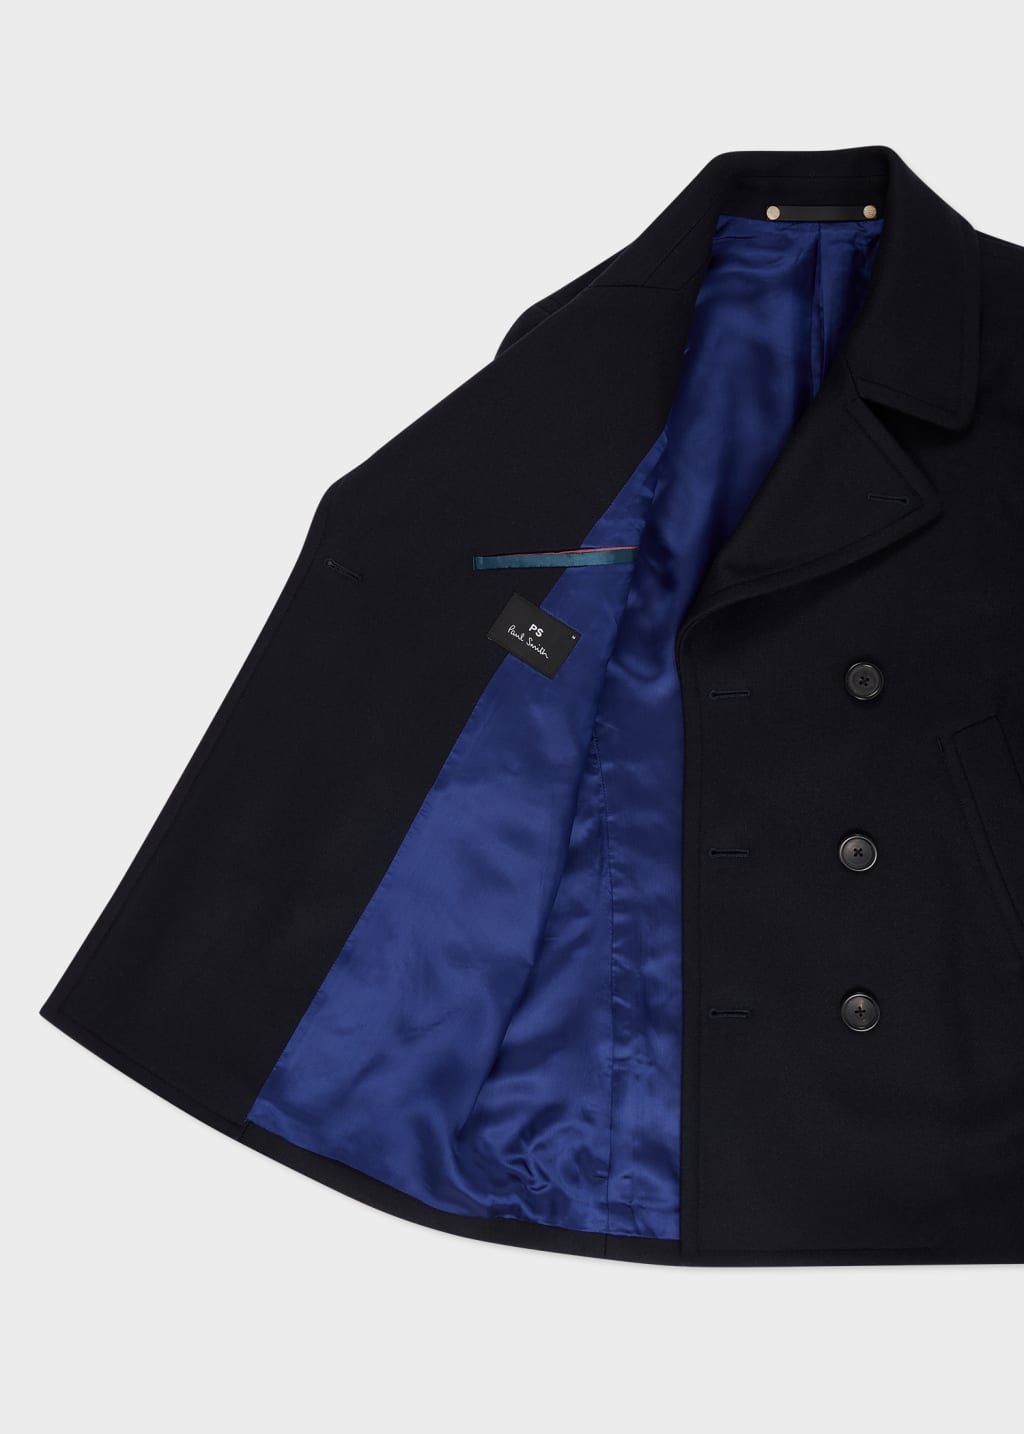 Model View - Navy Wool-Cashmere Pea Coat by Paul Smith